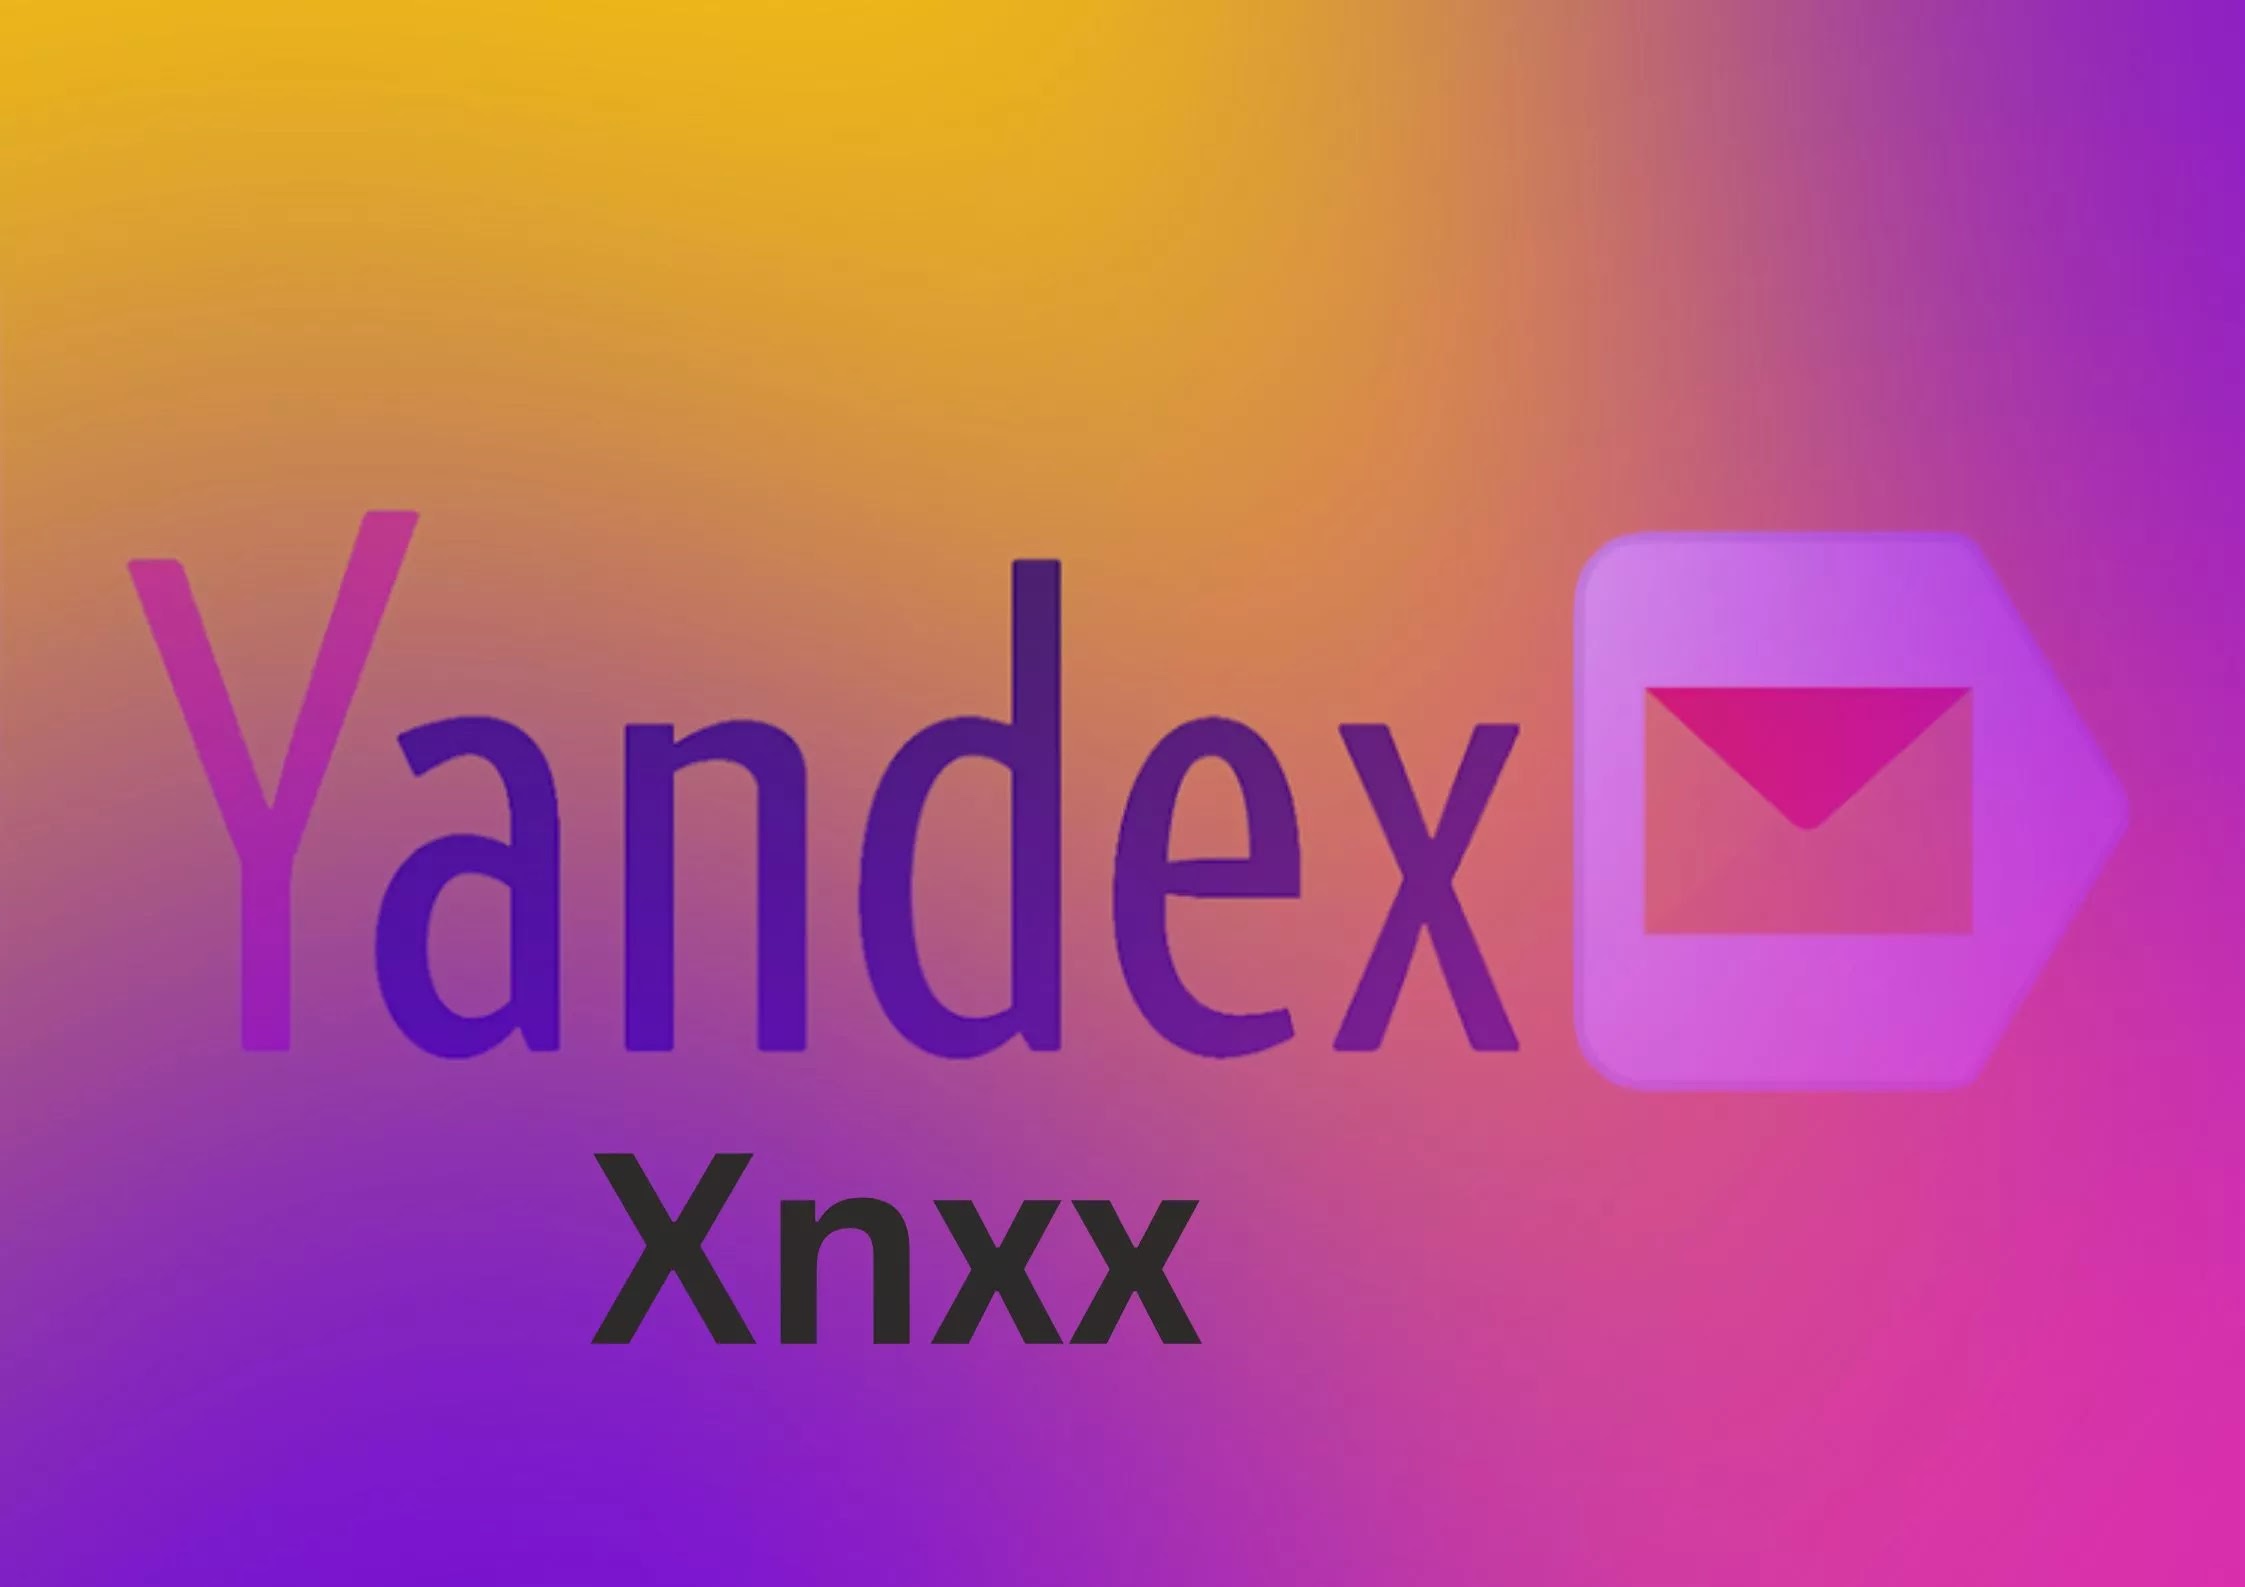 Yandex Xnxx Mail: Definition, History, Features, Benefits, Advantages and Disadvantages